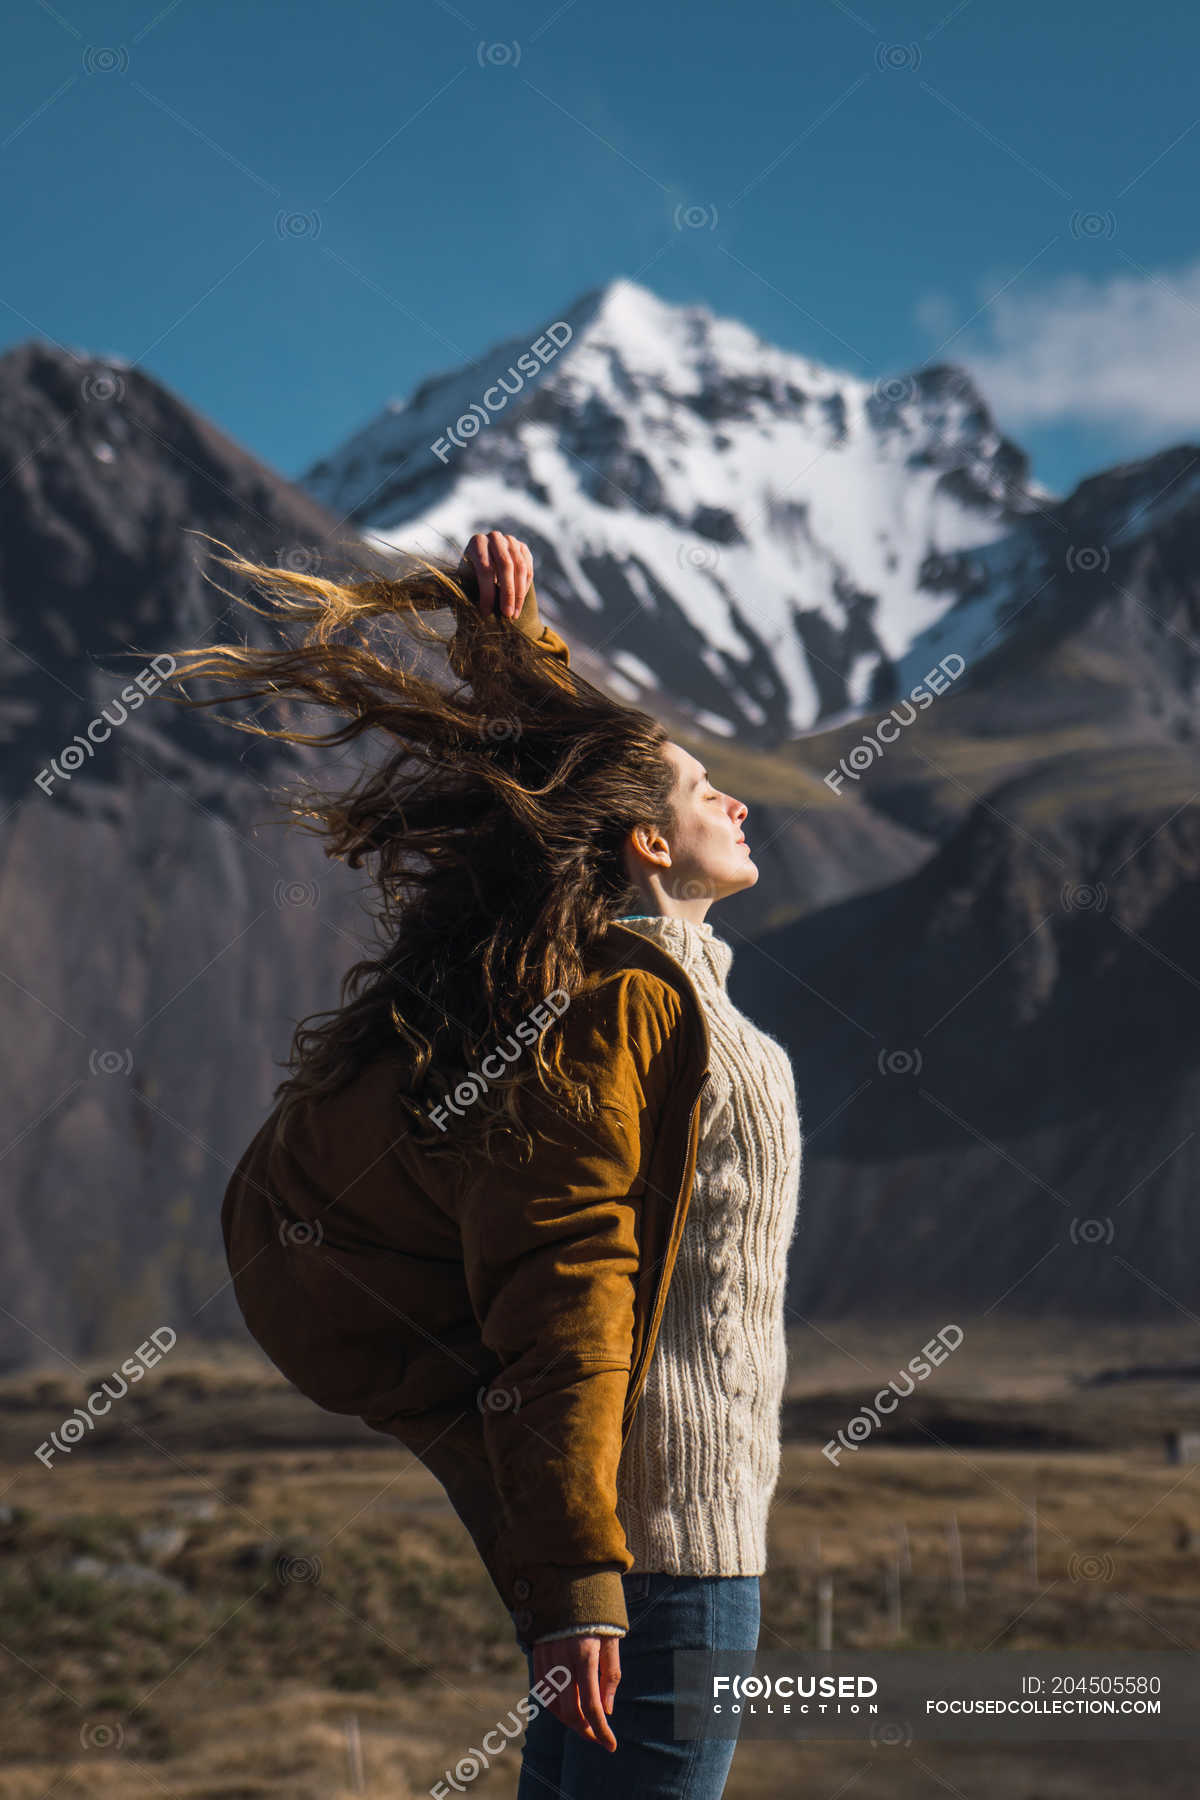 woman in the wind